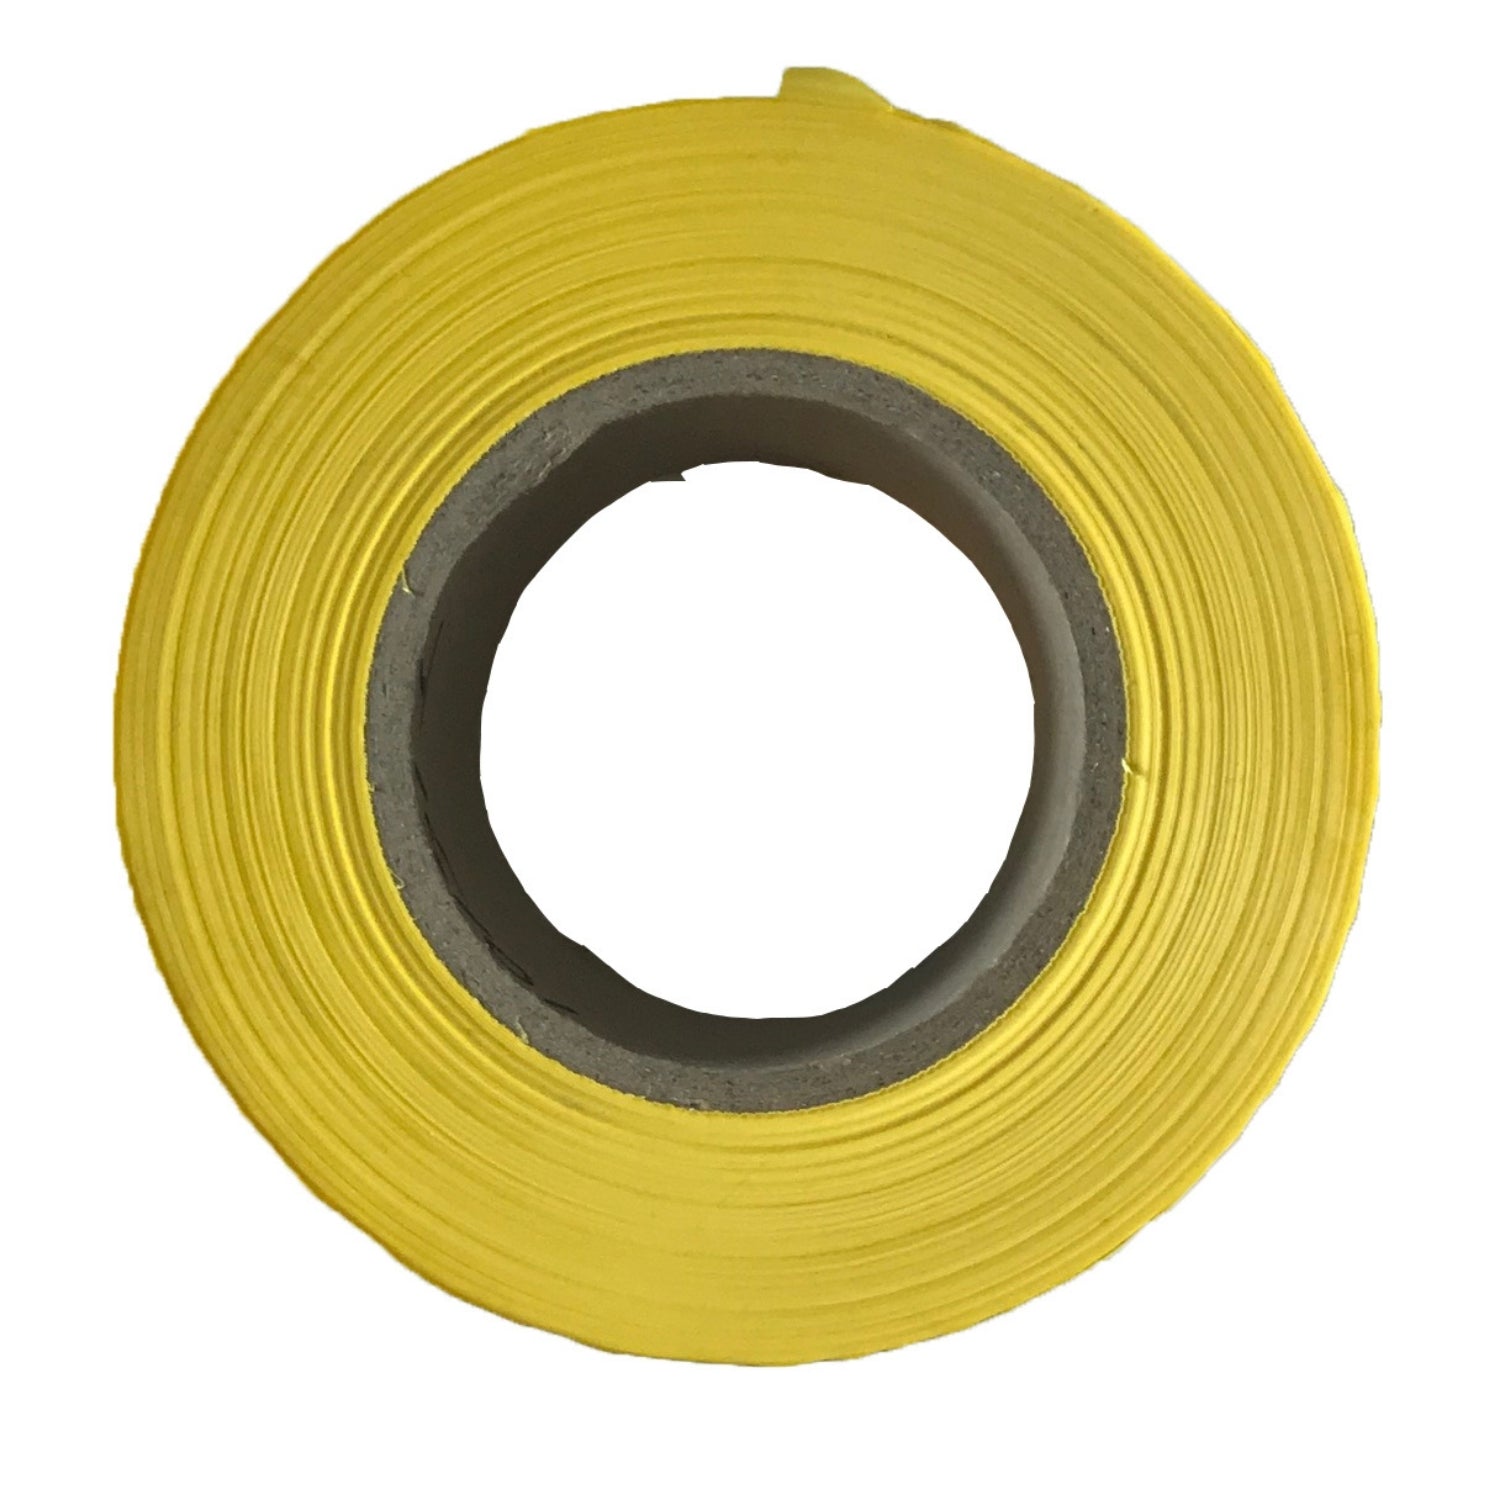 Caution Tape 300 ft roll-2 Mil (